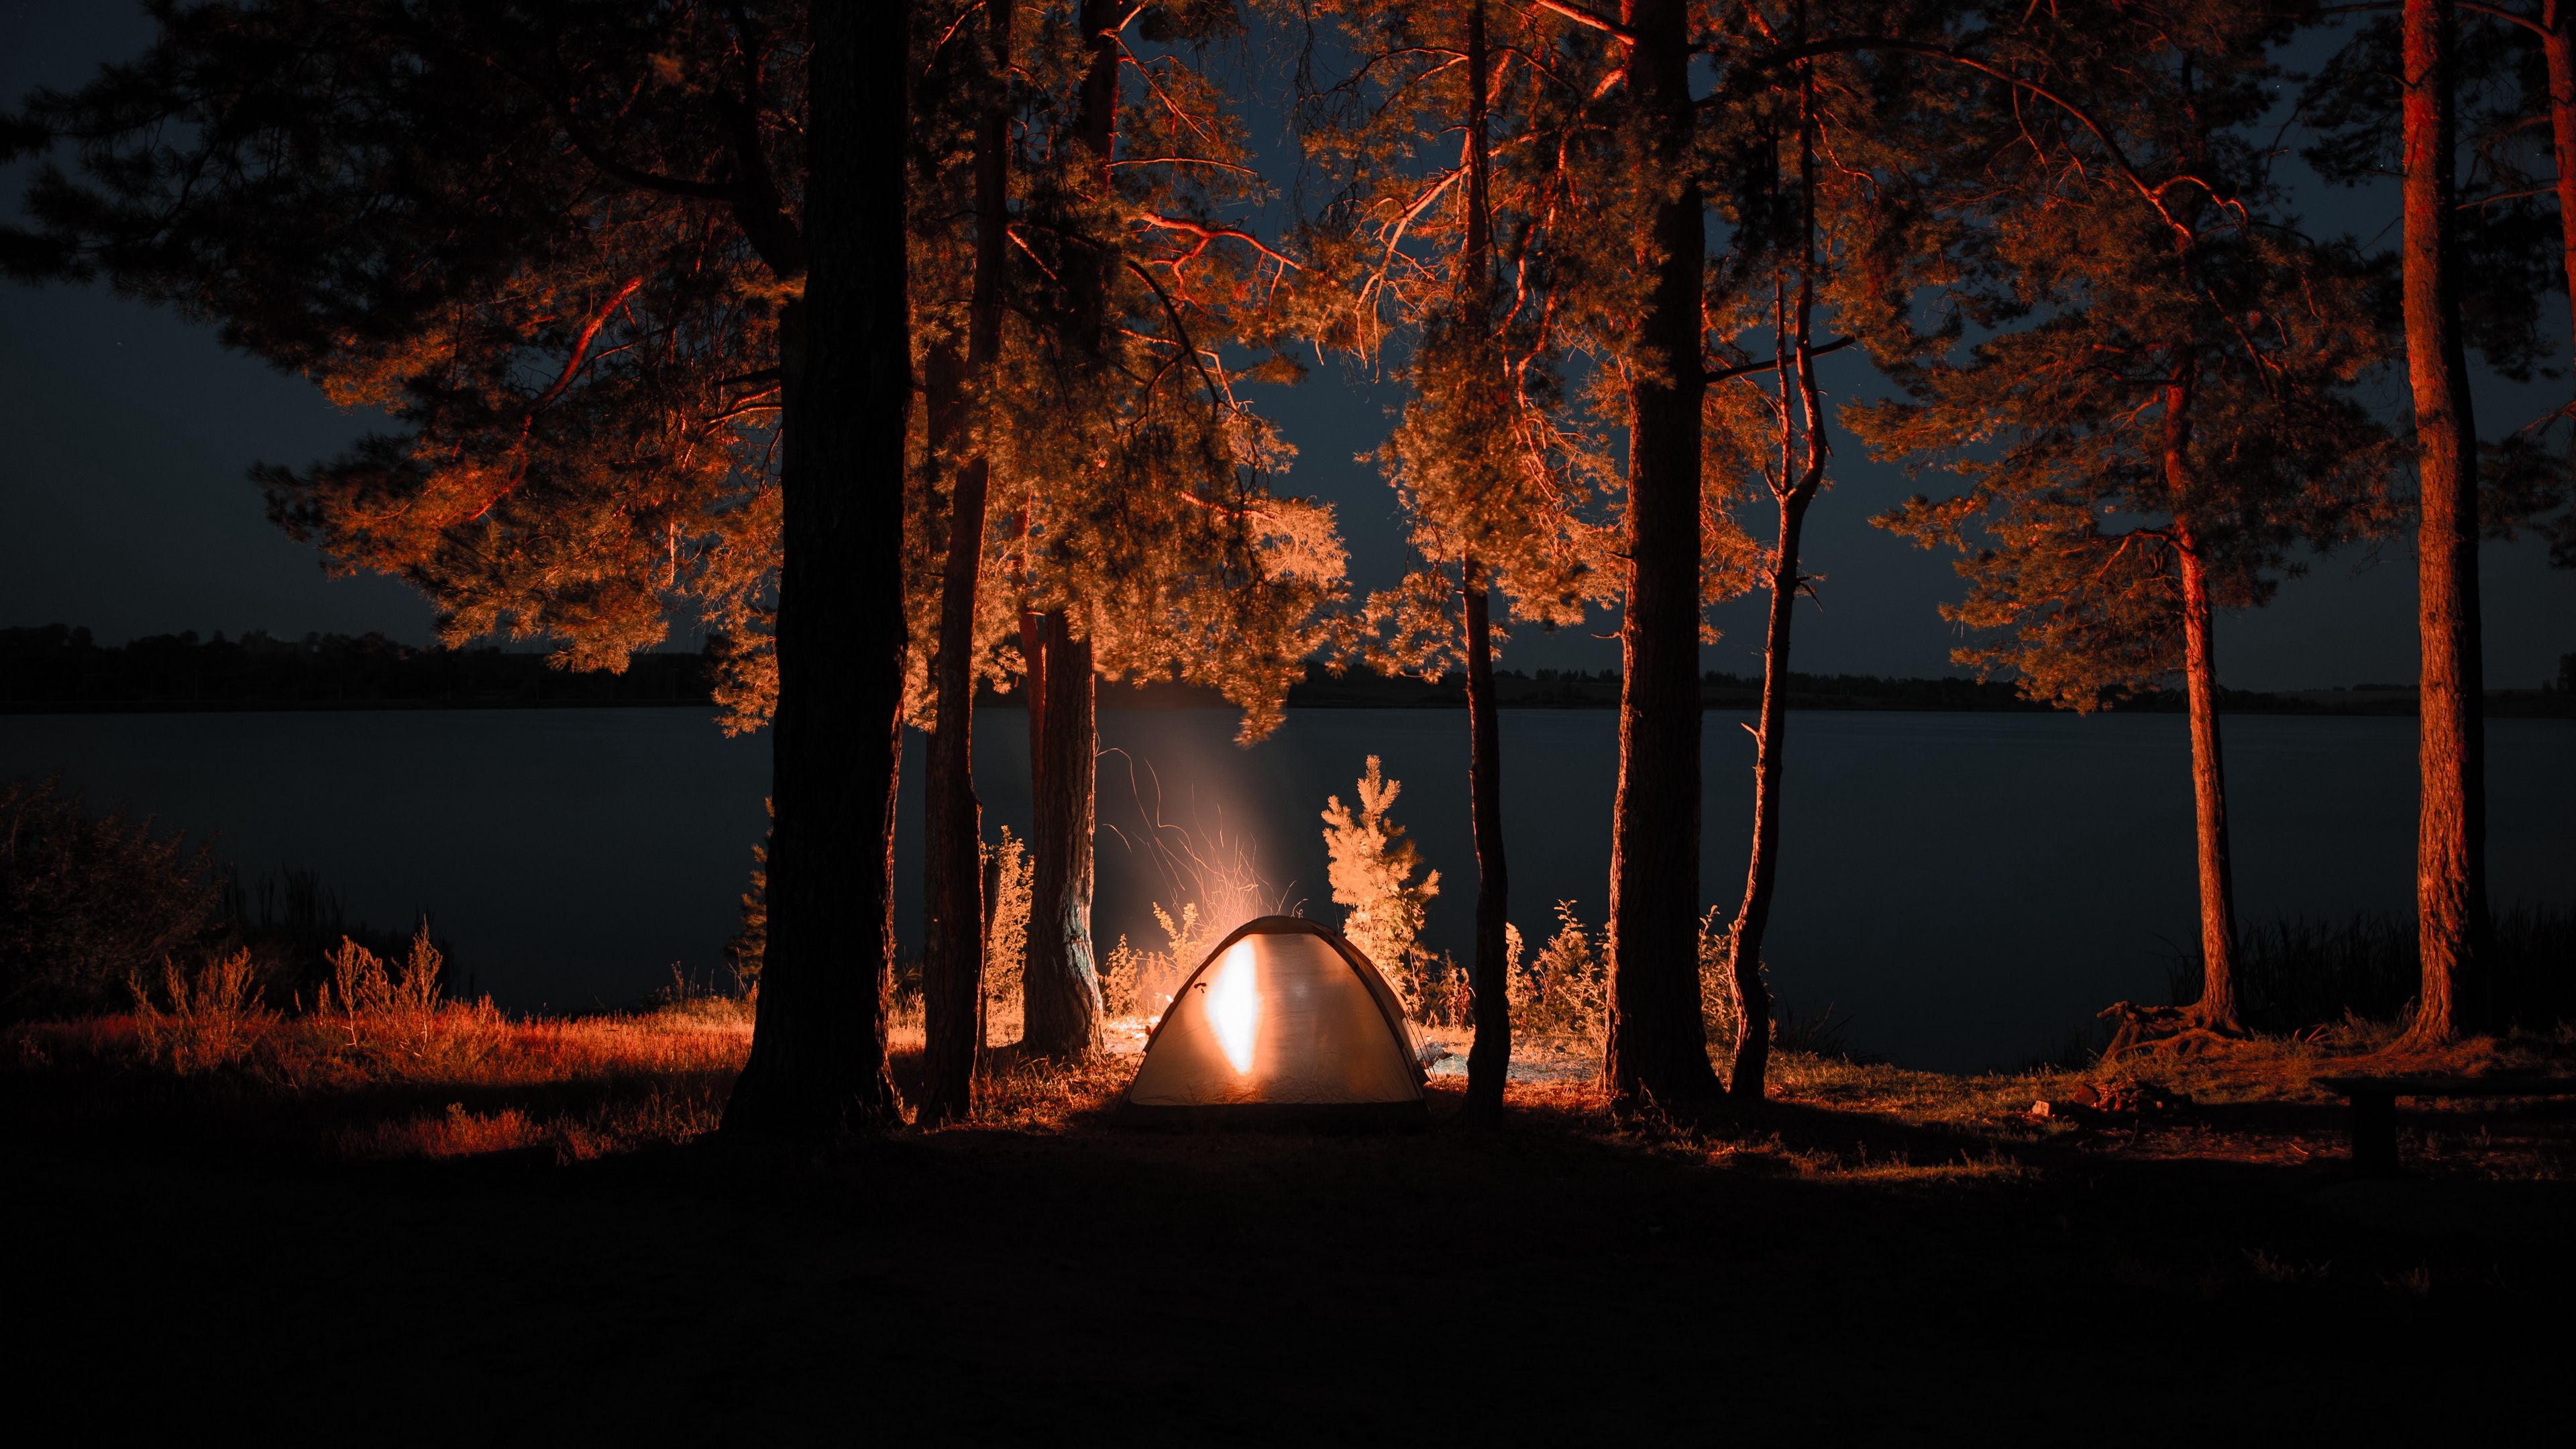 Download wallpaper 3840x2160 tent, campfire, camping, night, nature 4k uhd  16:9 hd background